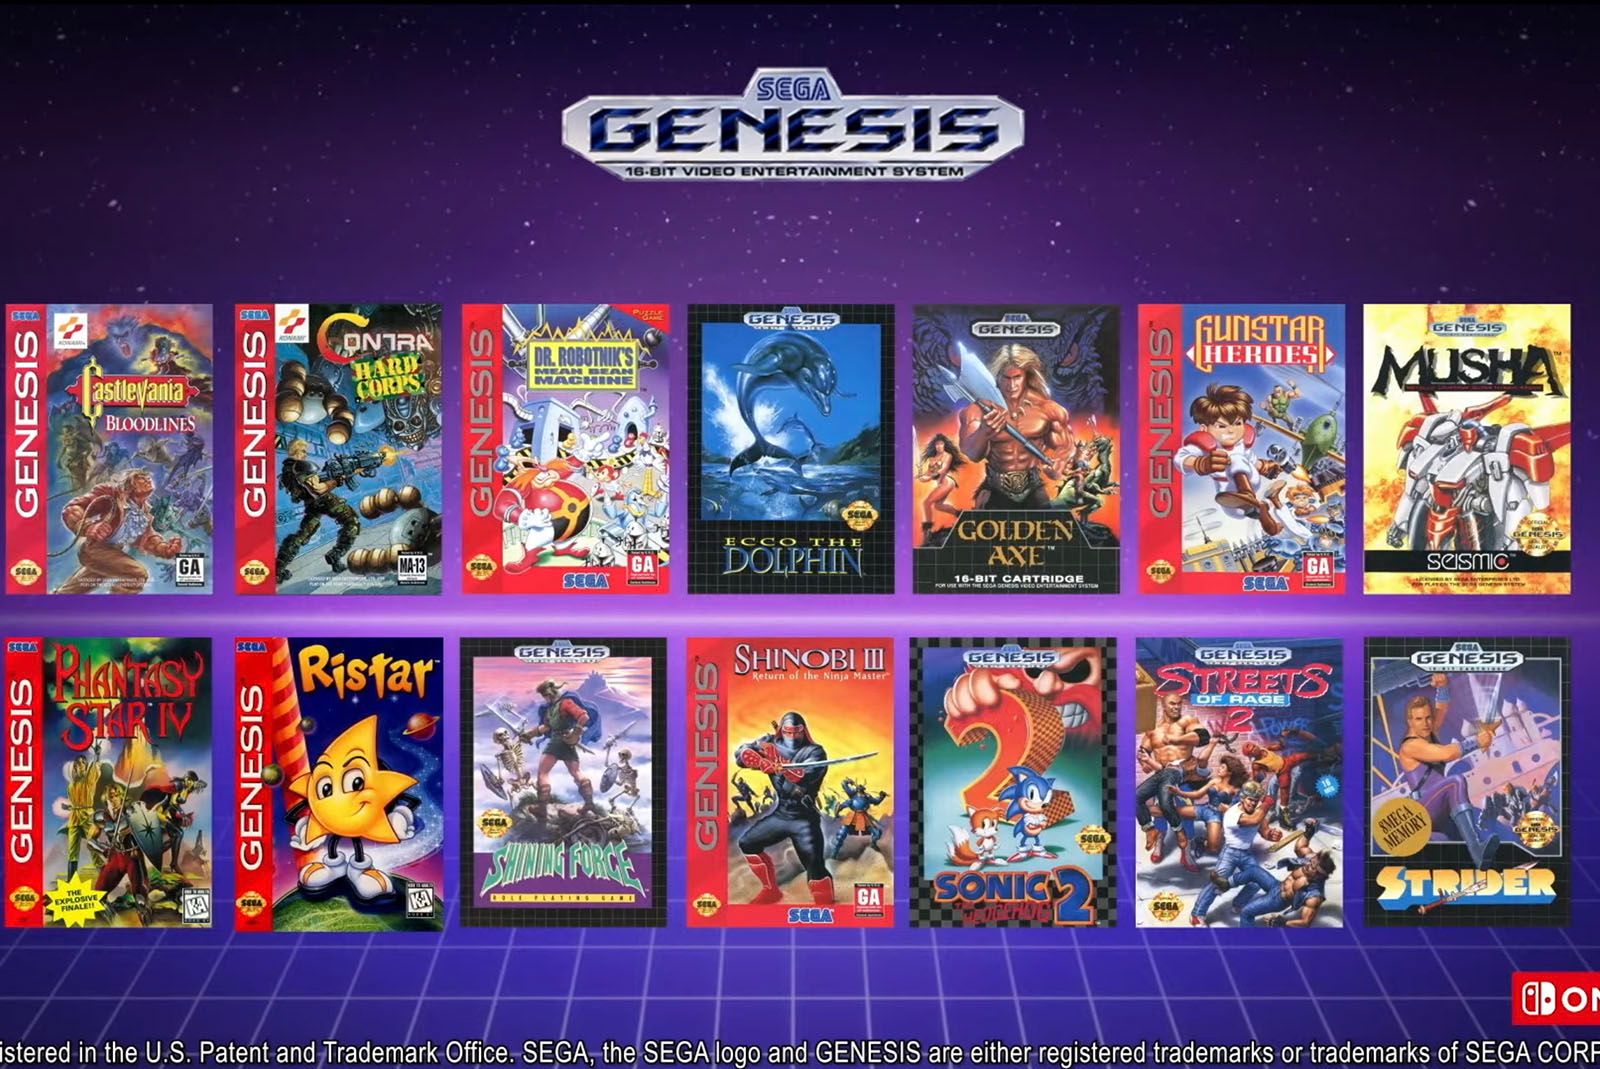 Nintendo 64 classics and SEGA Genesis games coming soon to Switch Online photo 3